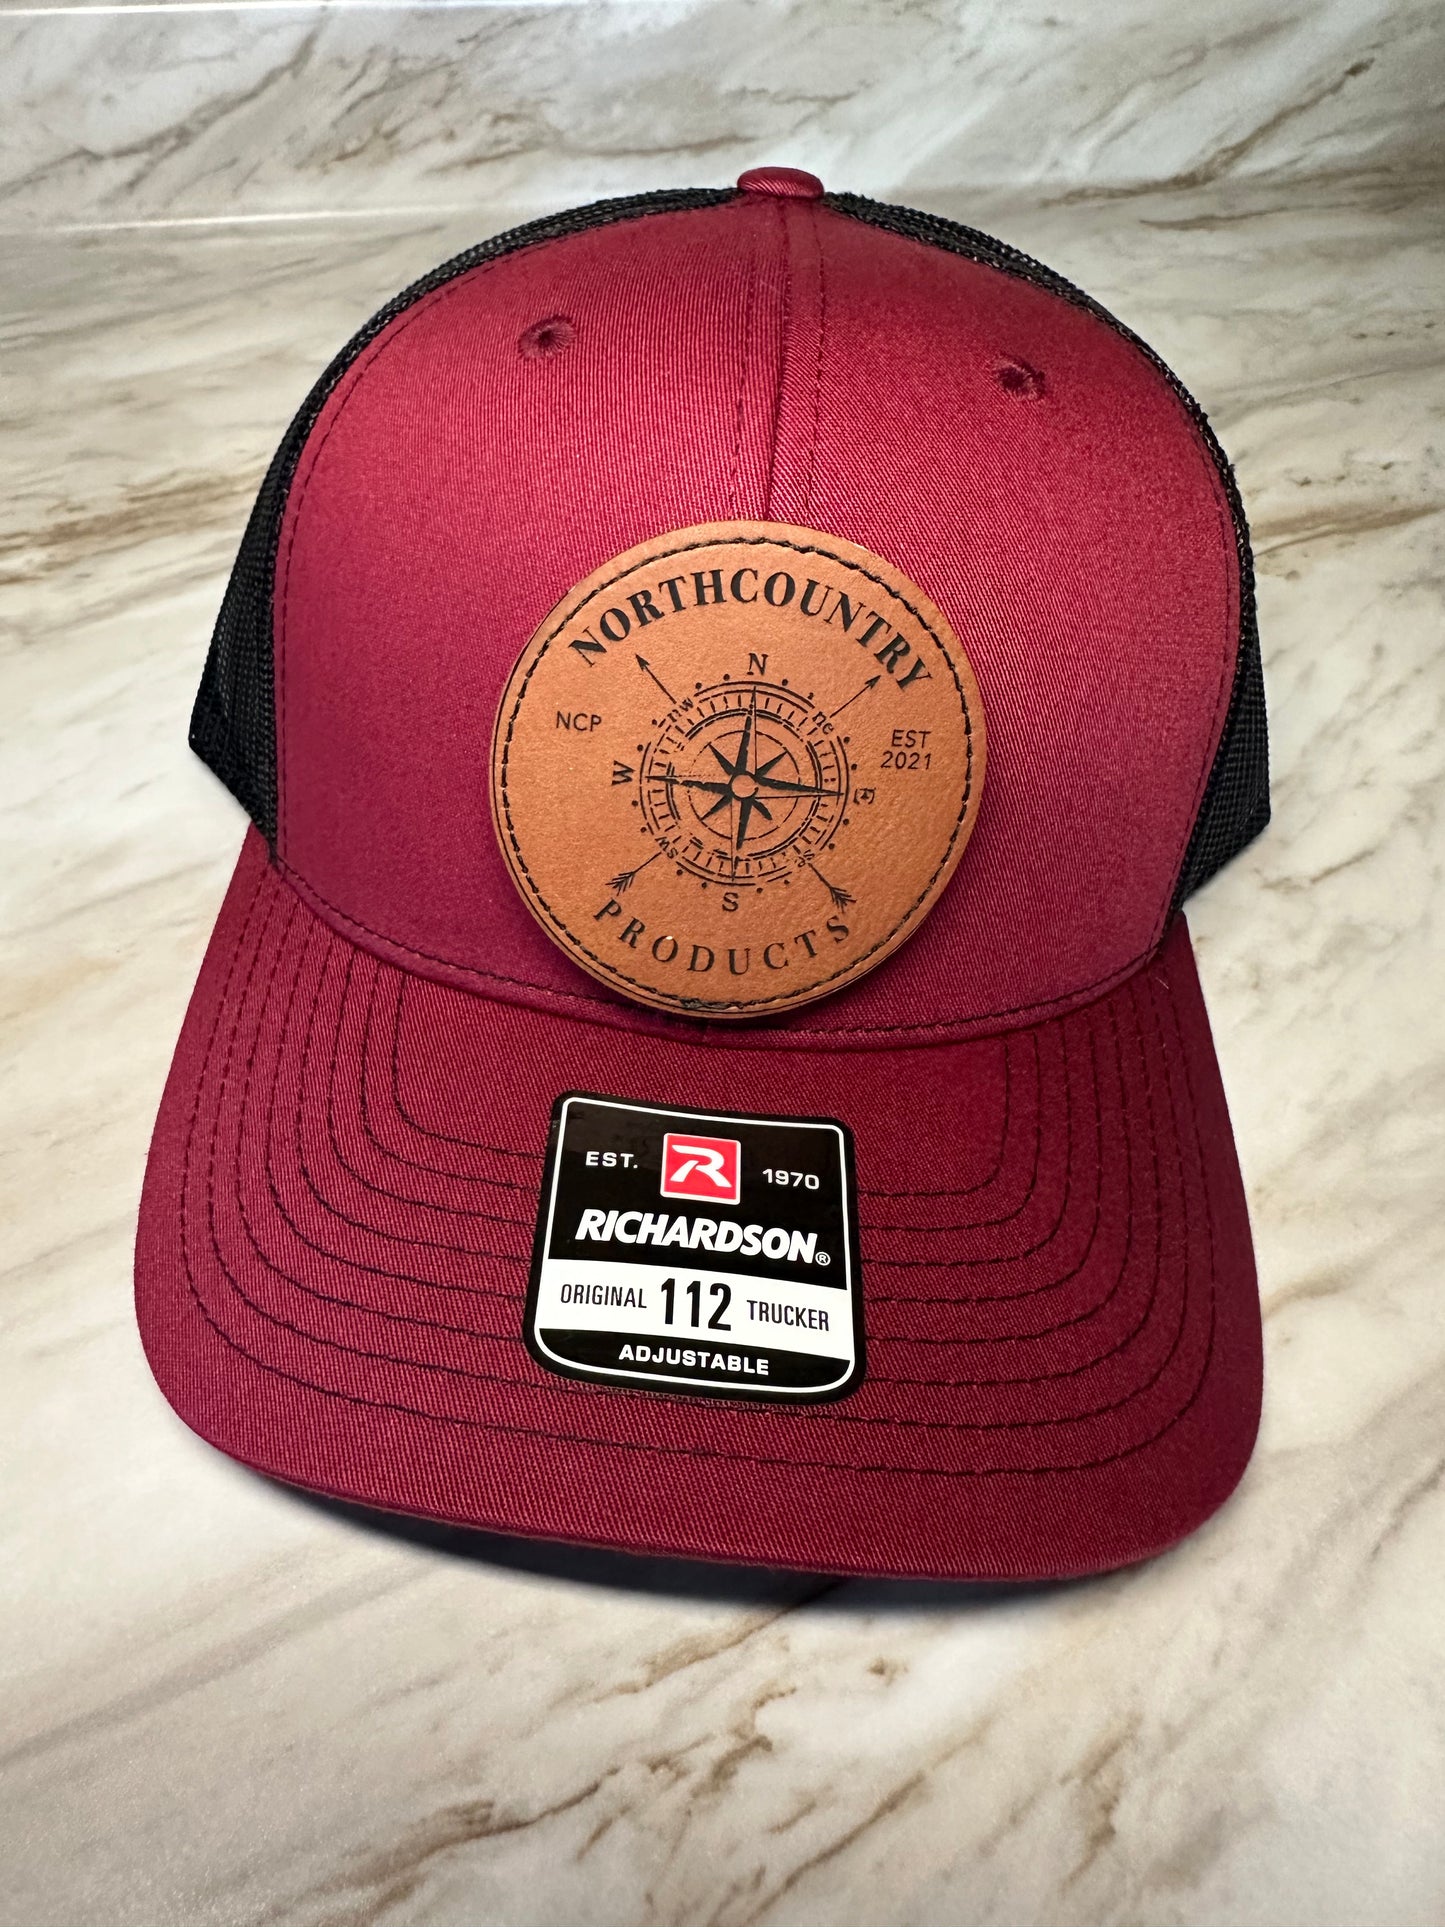 NorthCountry Products Hats